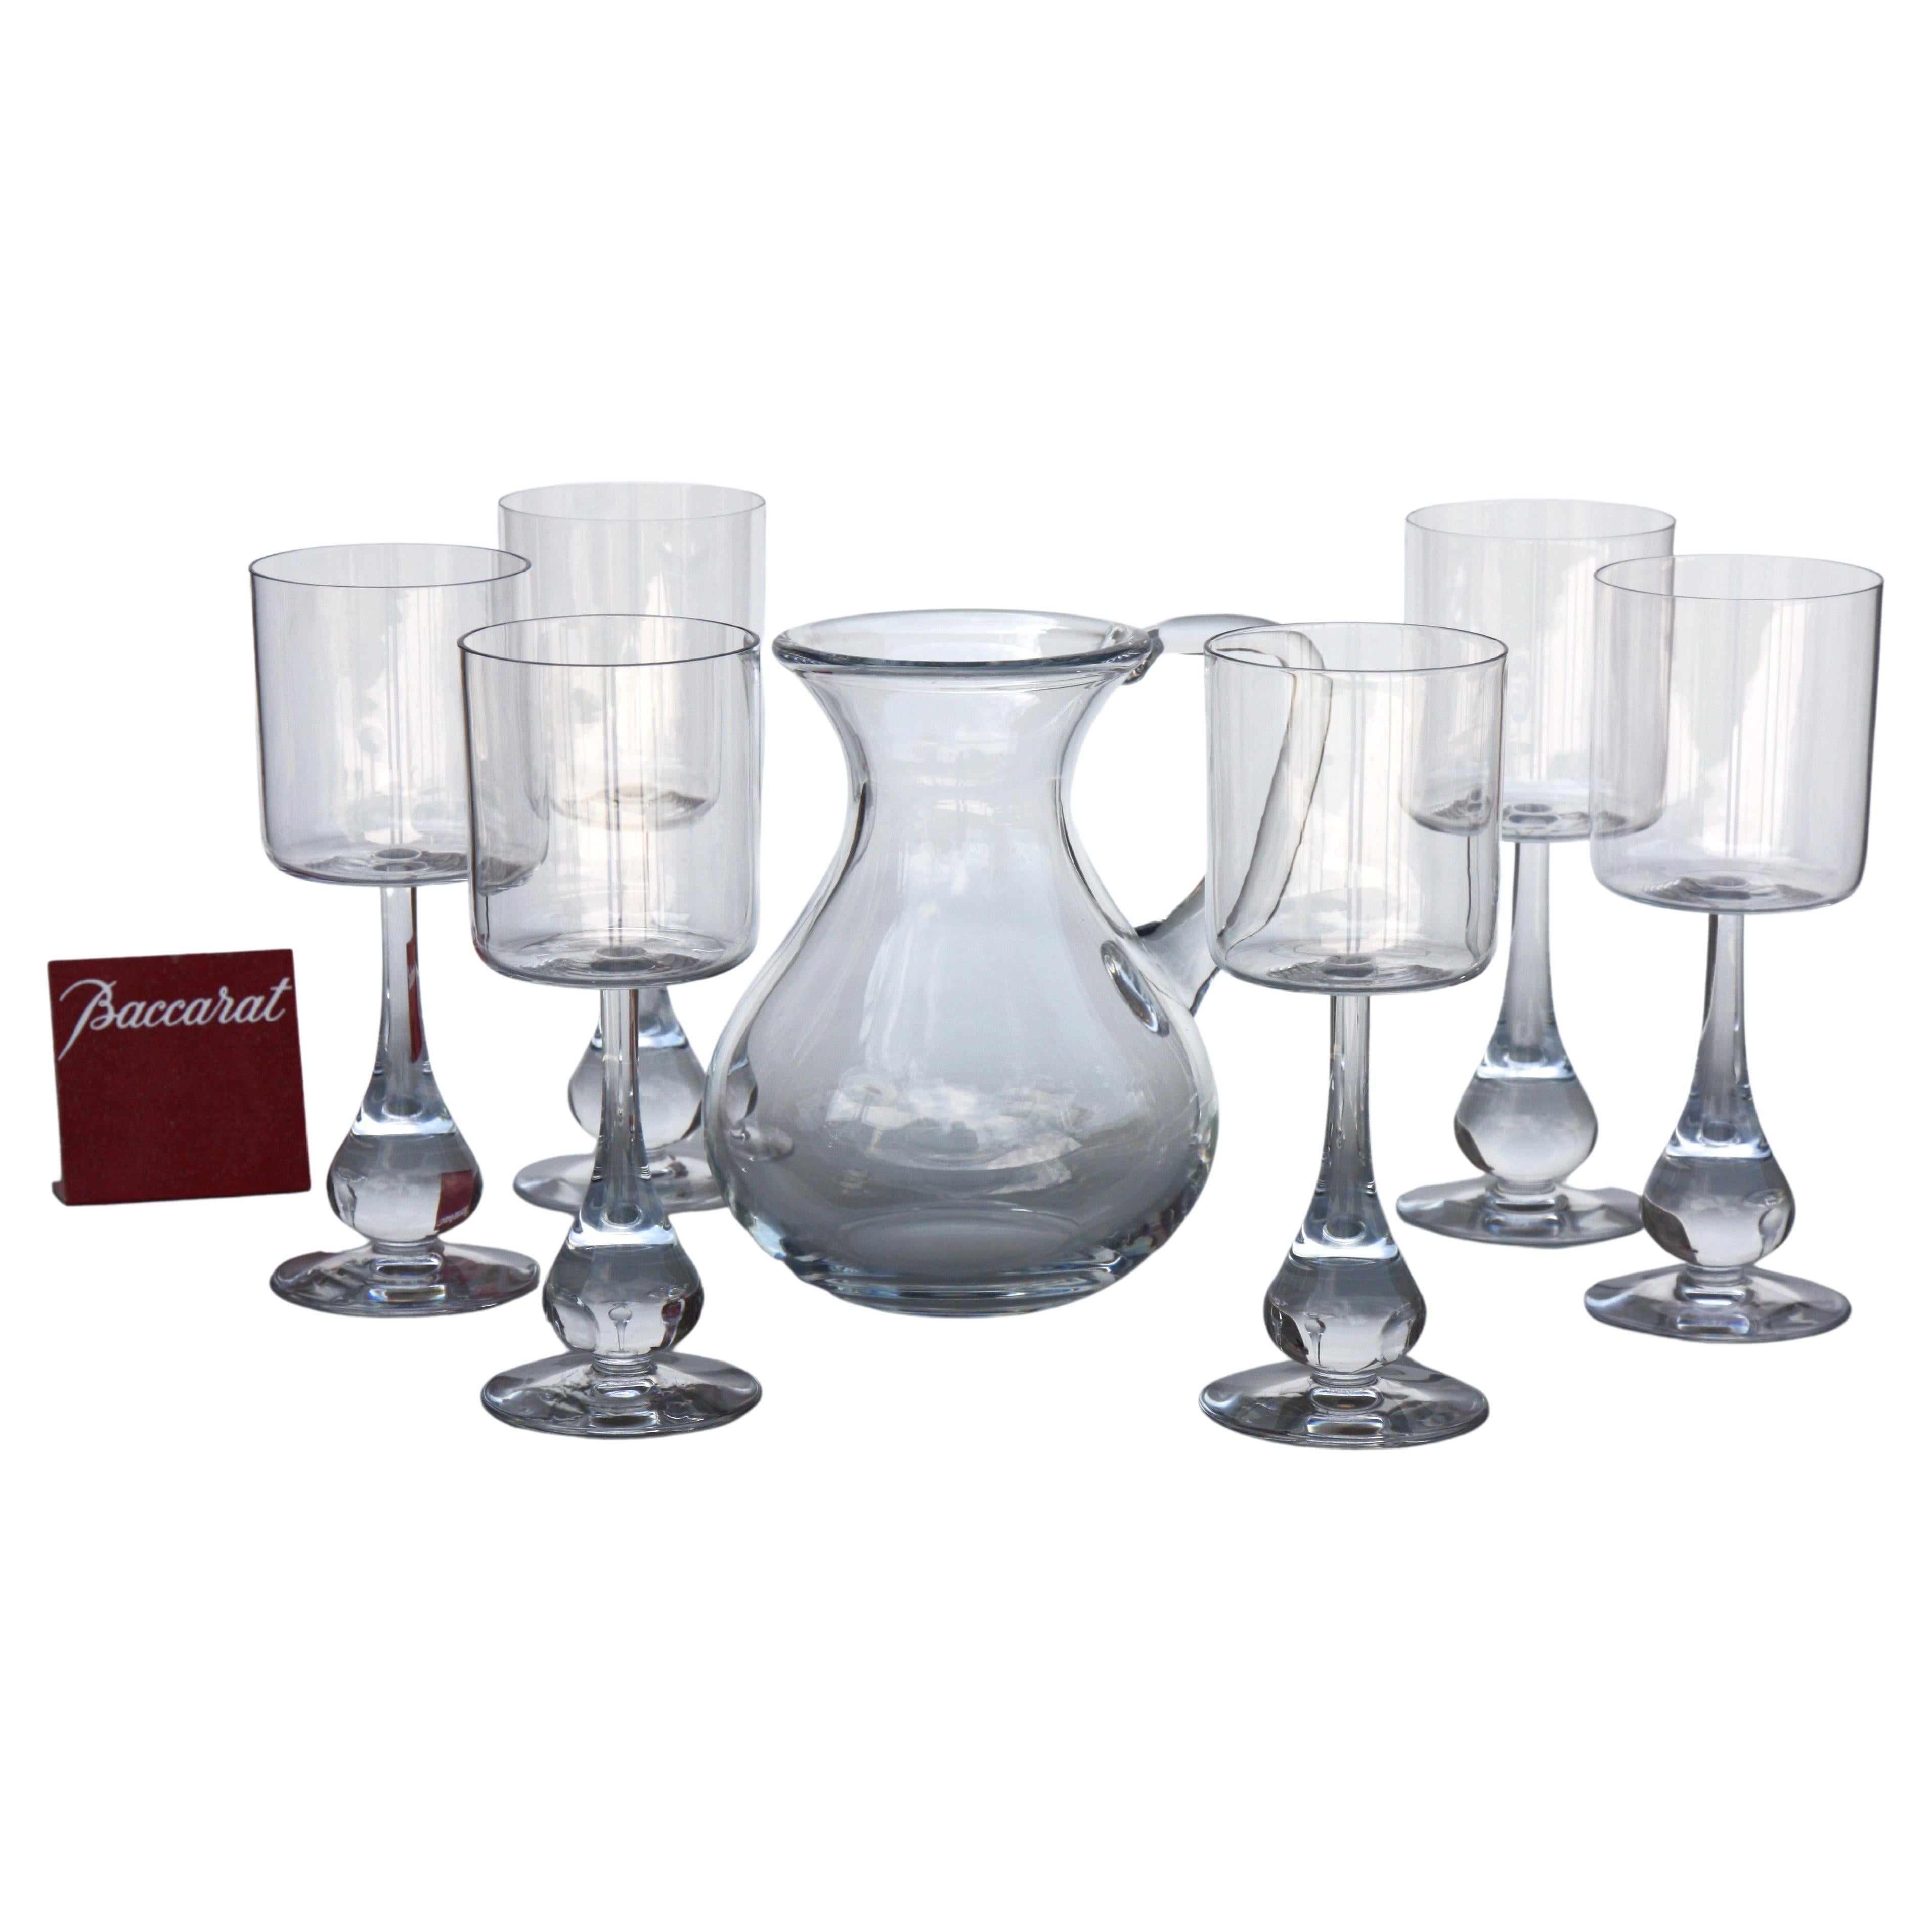 Water set in Baccarat crystal, José model. Glasses and water pitcher For Sale